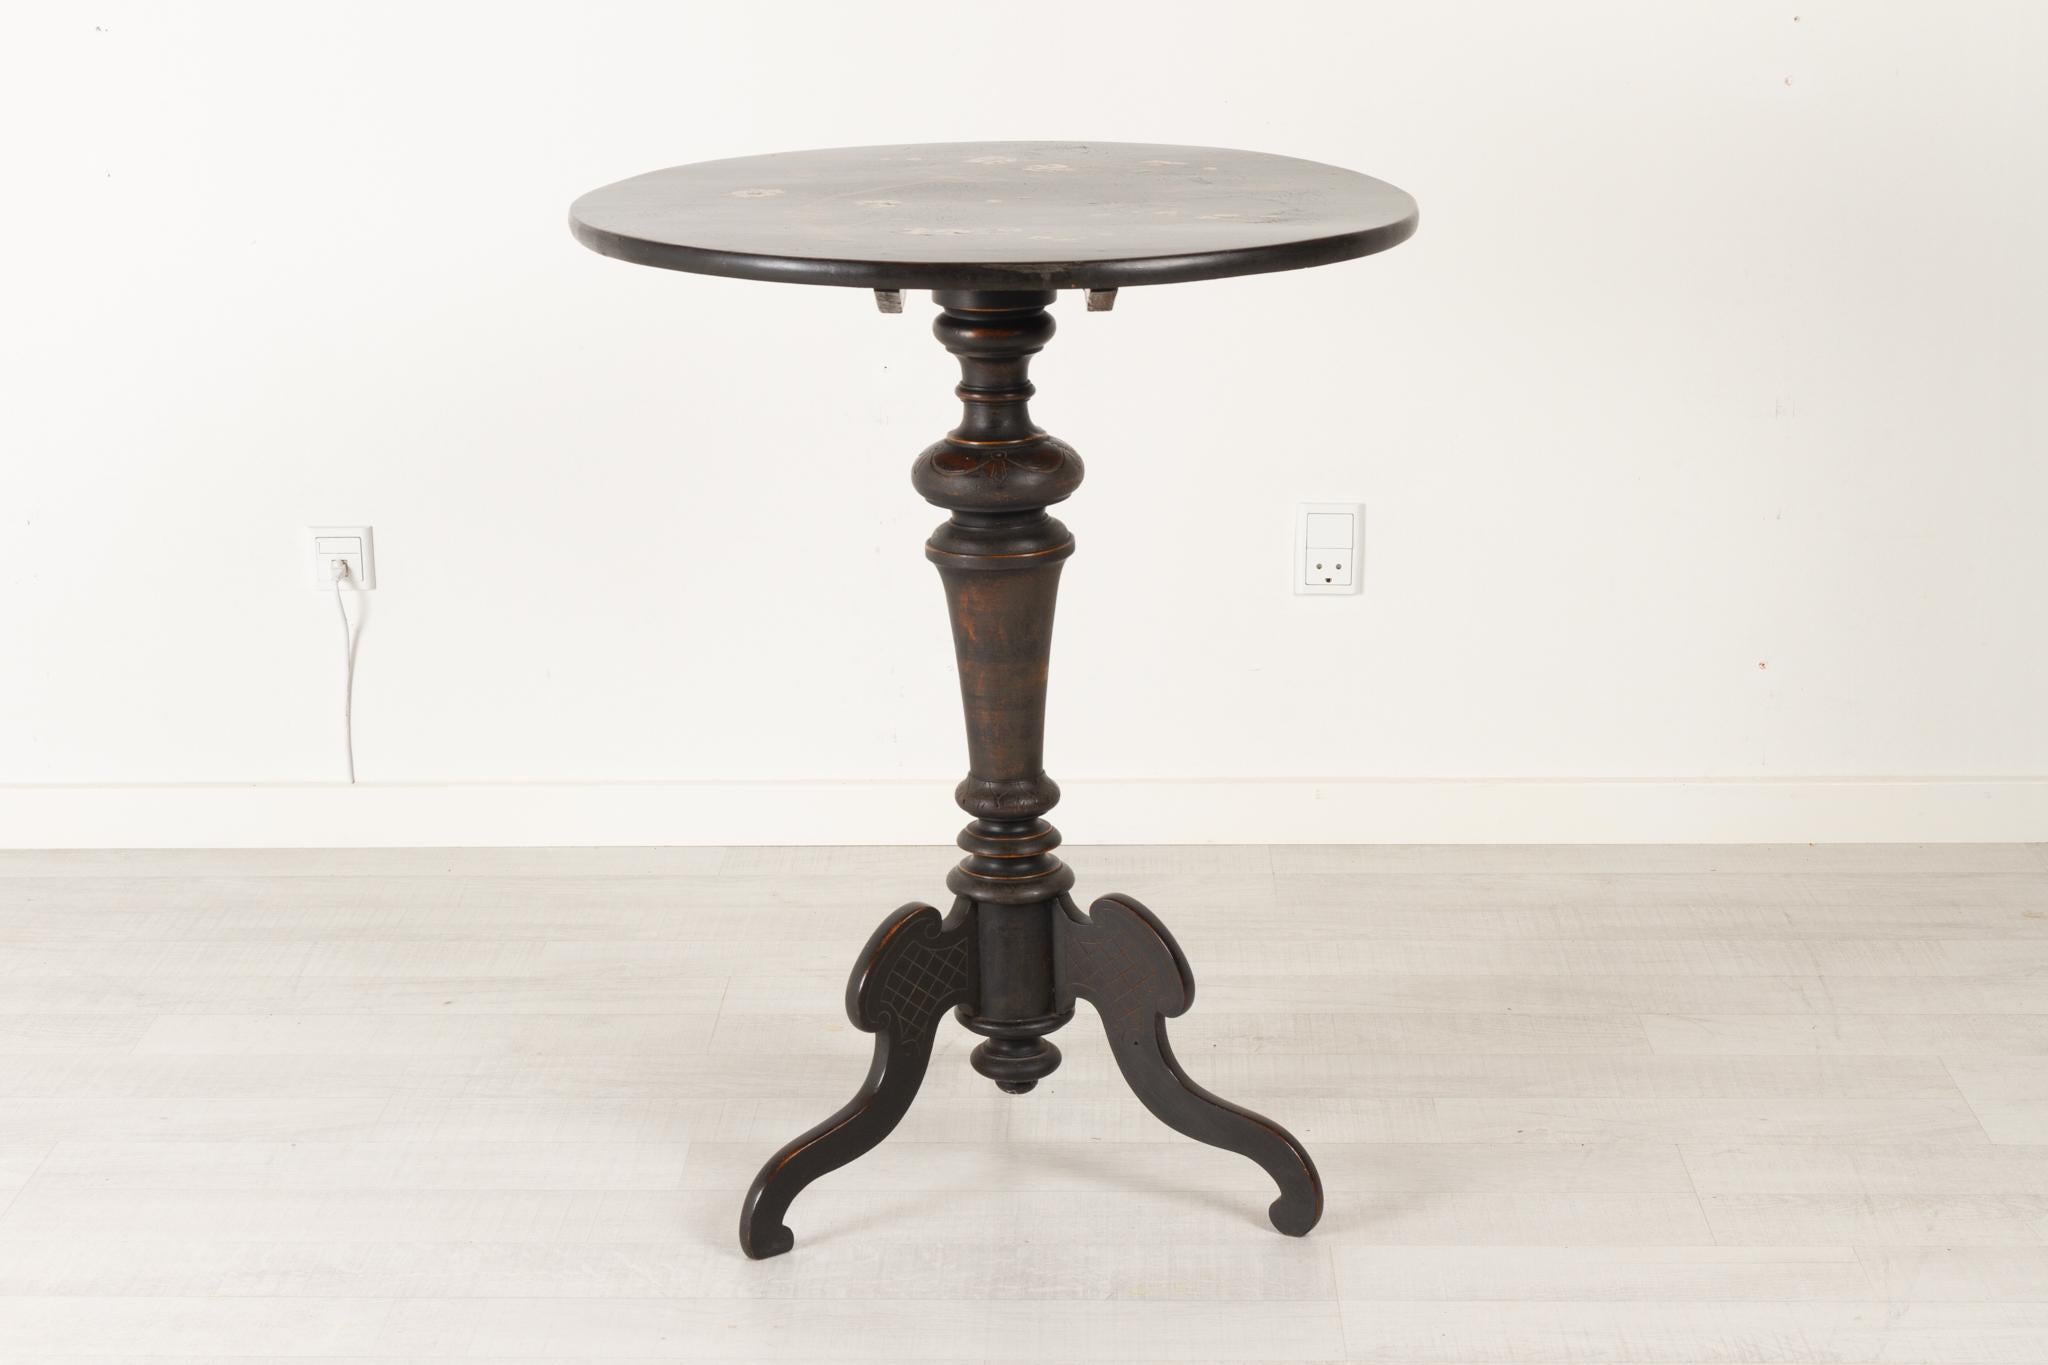 Antique ebonized and laquered side table, Late 1800s
Elegant and decorative round table with bird motifs. Inlays in wood and mother of pearl.
Beautiful wear and patina.
Good condition. Stable construction. Some older repairs. Fully functional as